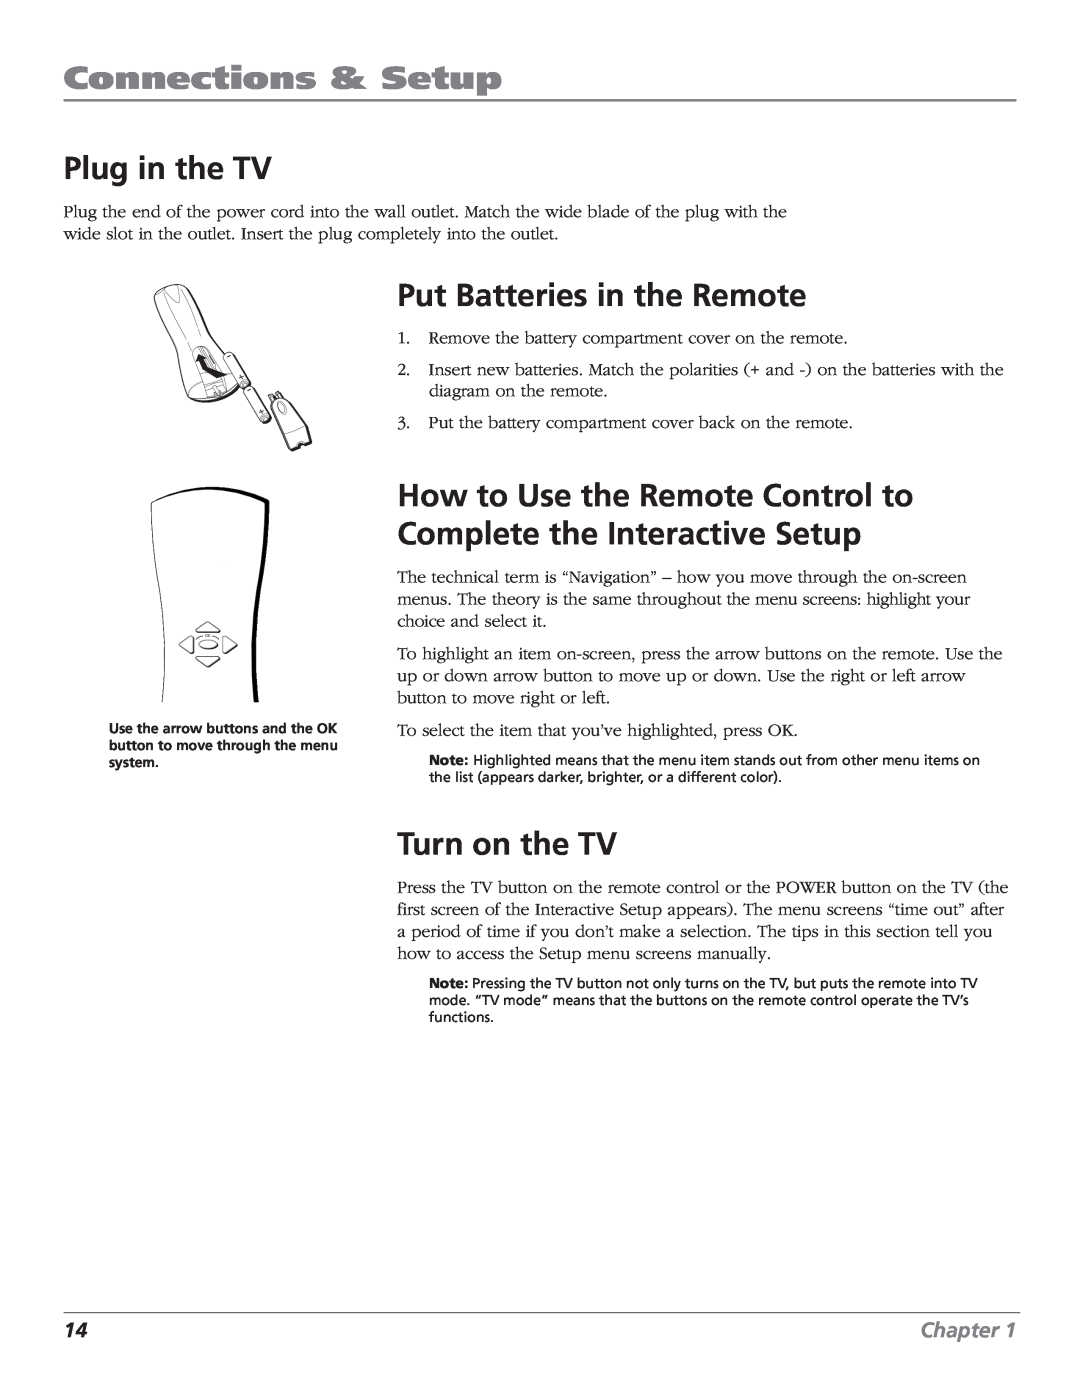 RCA MR68TF700 Plug in the TV, Put Batteries in the Remote, How to Use the Remote Control to Complete the Interactive Setup 